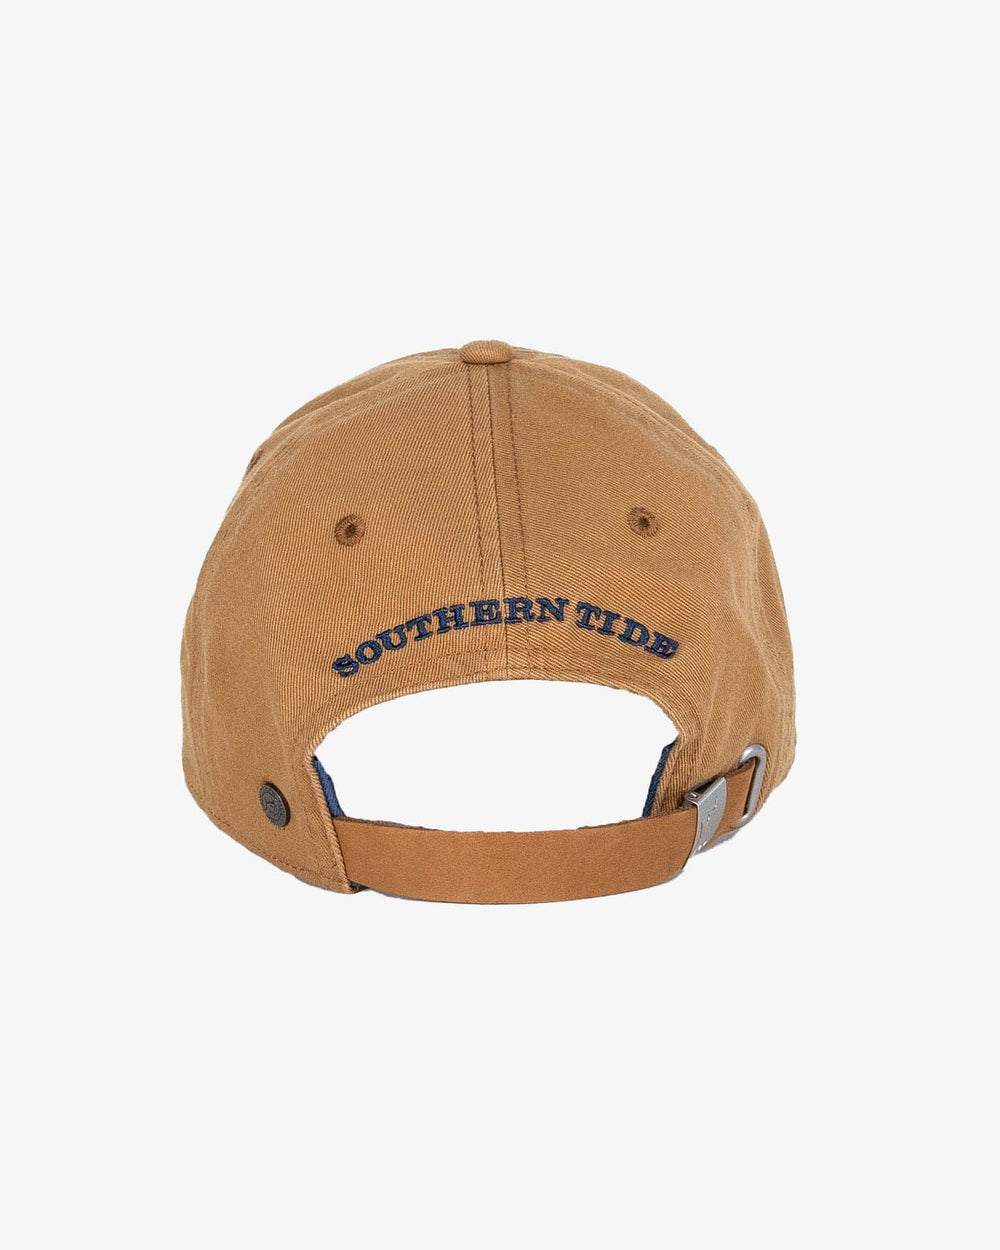 The back view of the Southern Tide Mini Skipjack Leather Strap Hat by Southern Tide - Camel